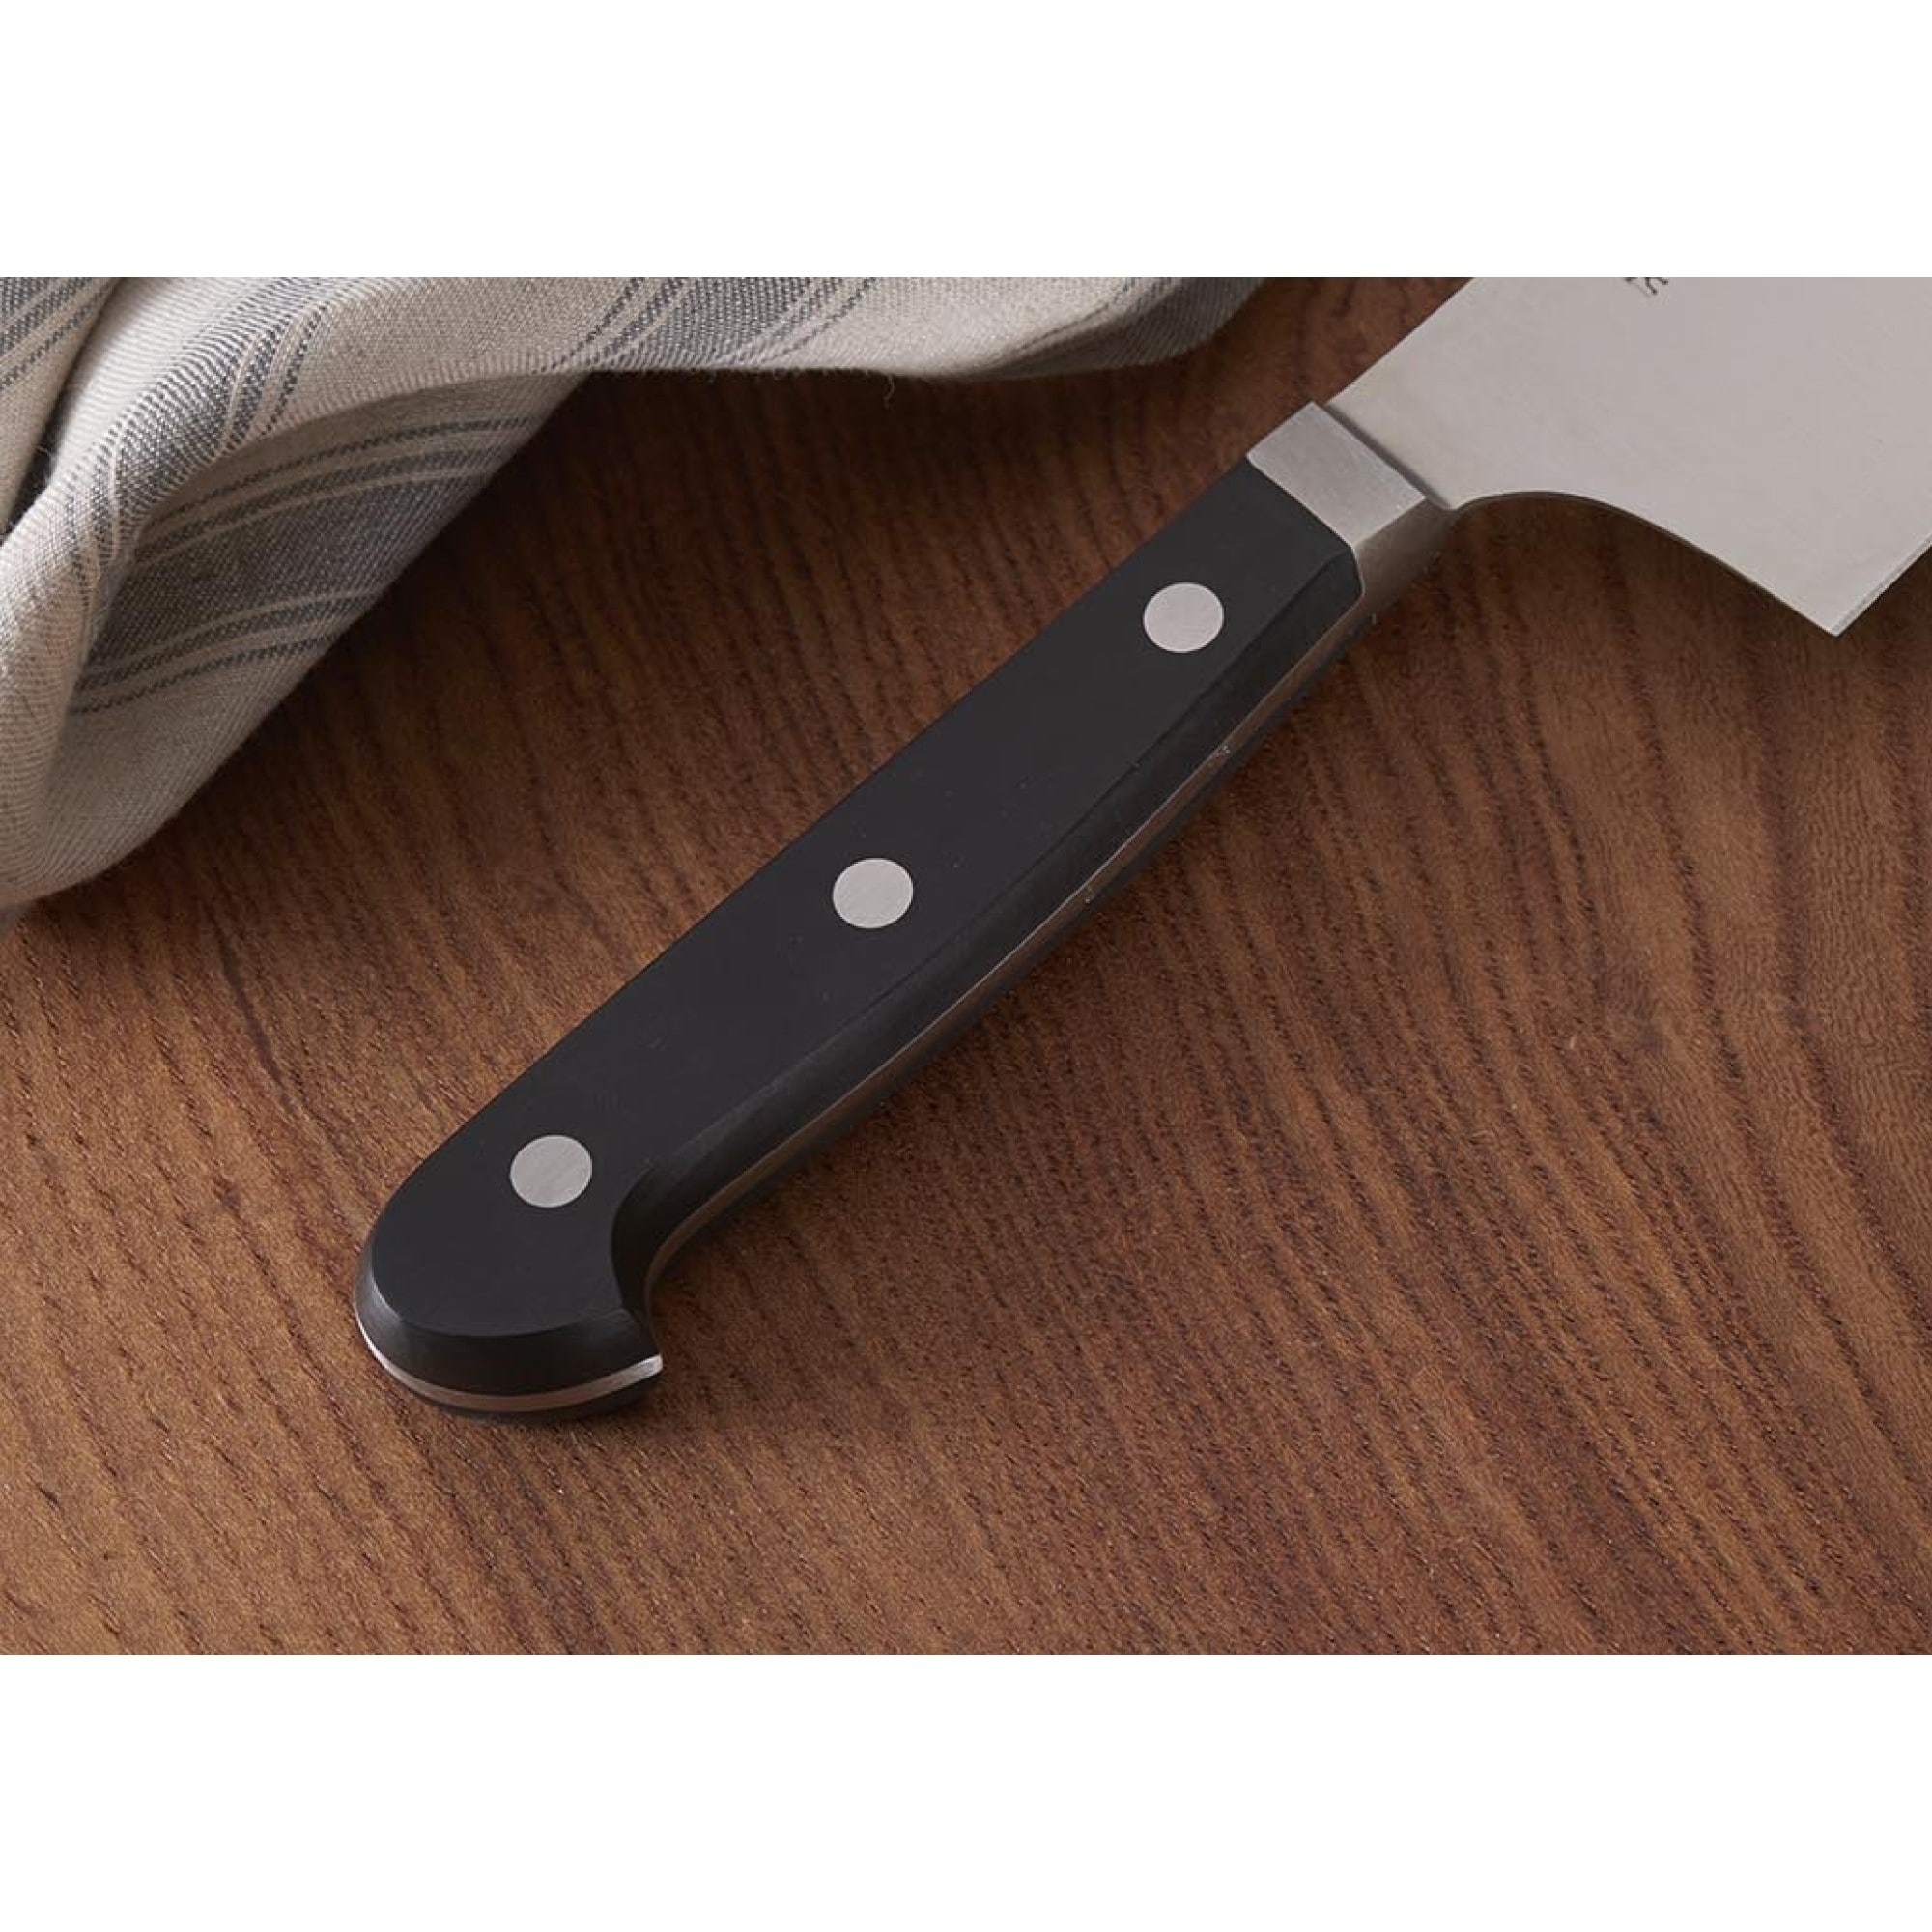 https://ak1.ostkcdn.com/images/products/is/images/direct/a86e1c267e09bcbf9d733049a8d441f2e729f56c/HENCKELS-CLASSIC-Chef%27s-Knife.jpg